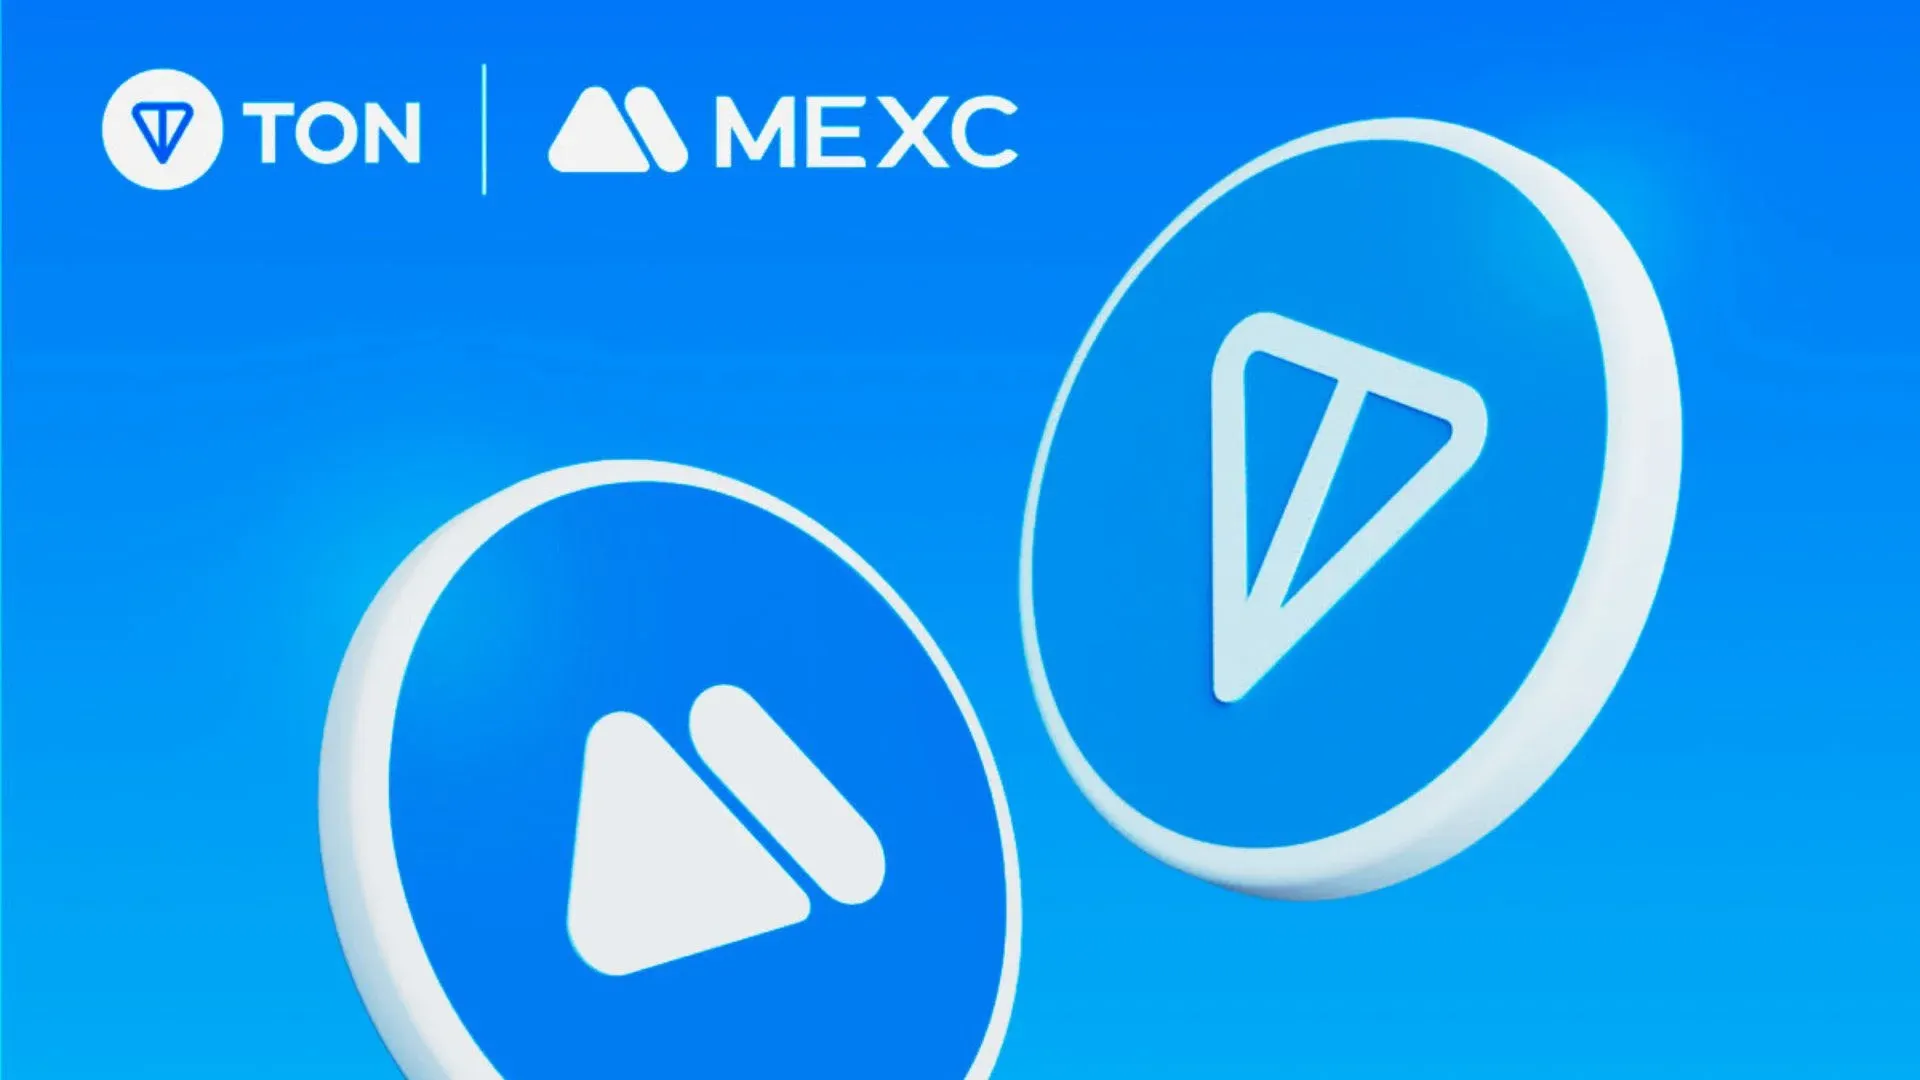 MEXC Ventures Invests In TON To Boost Global Web3 Adoption